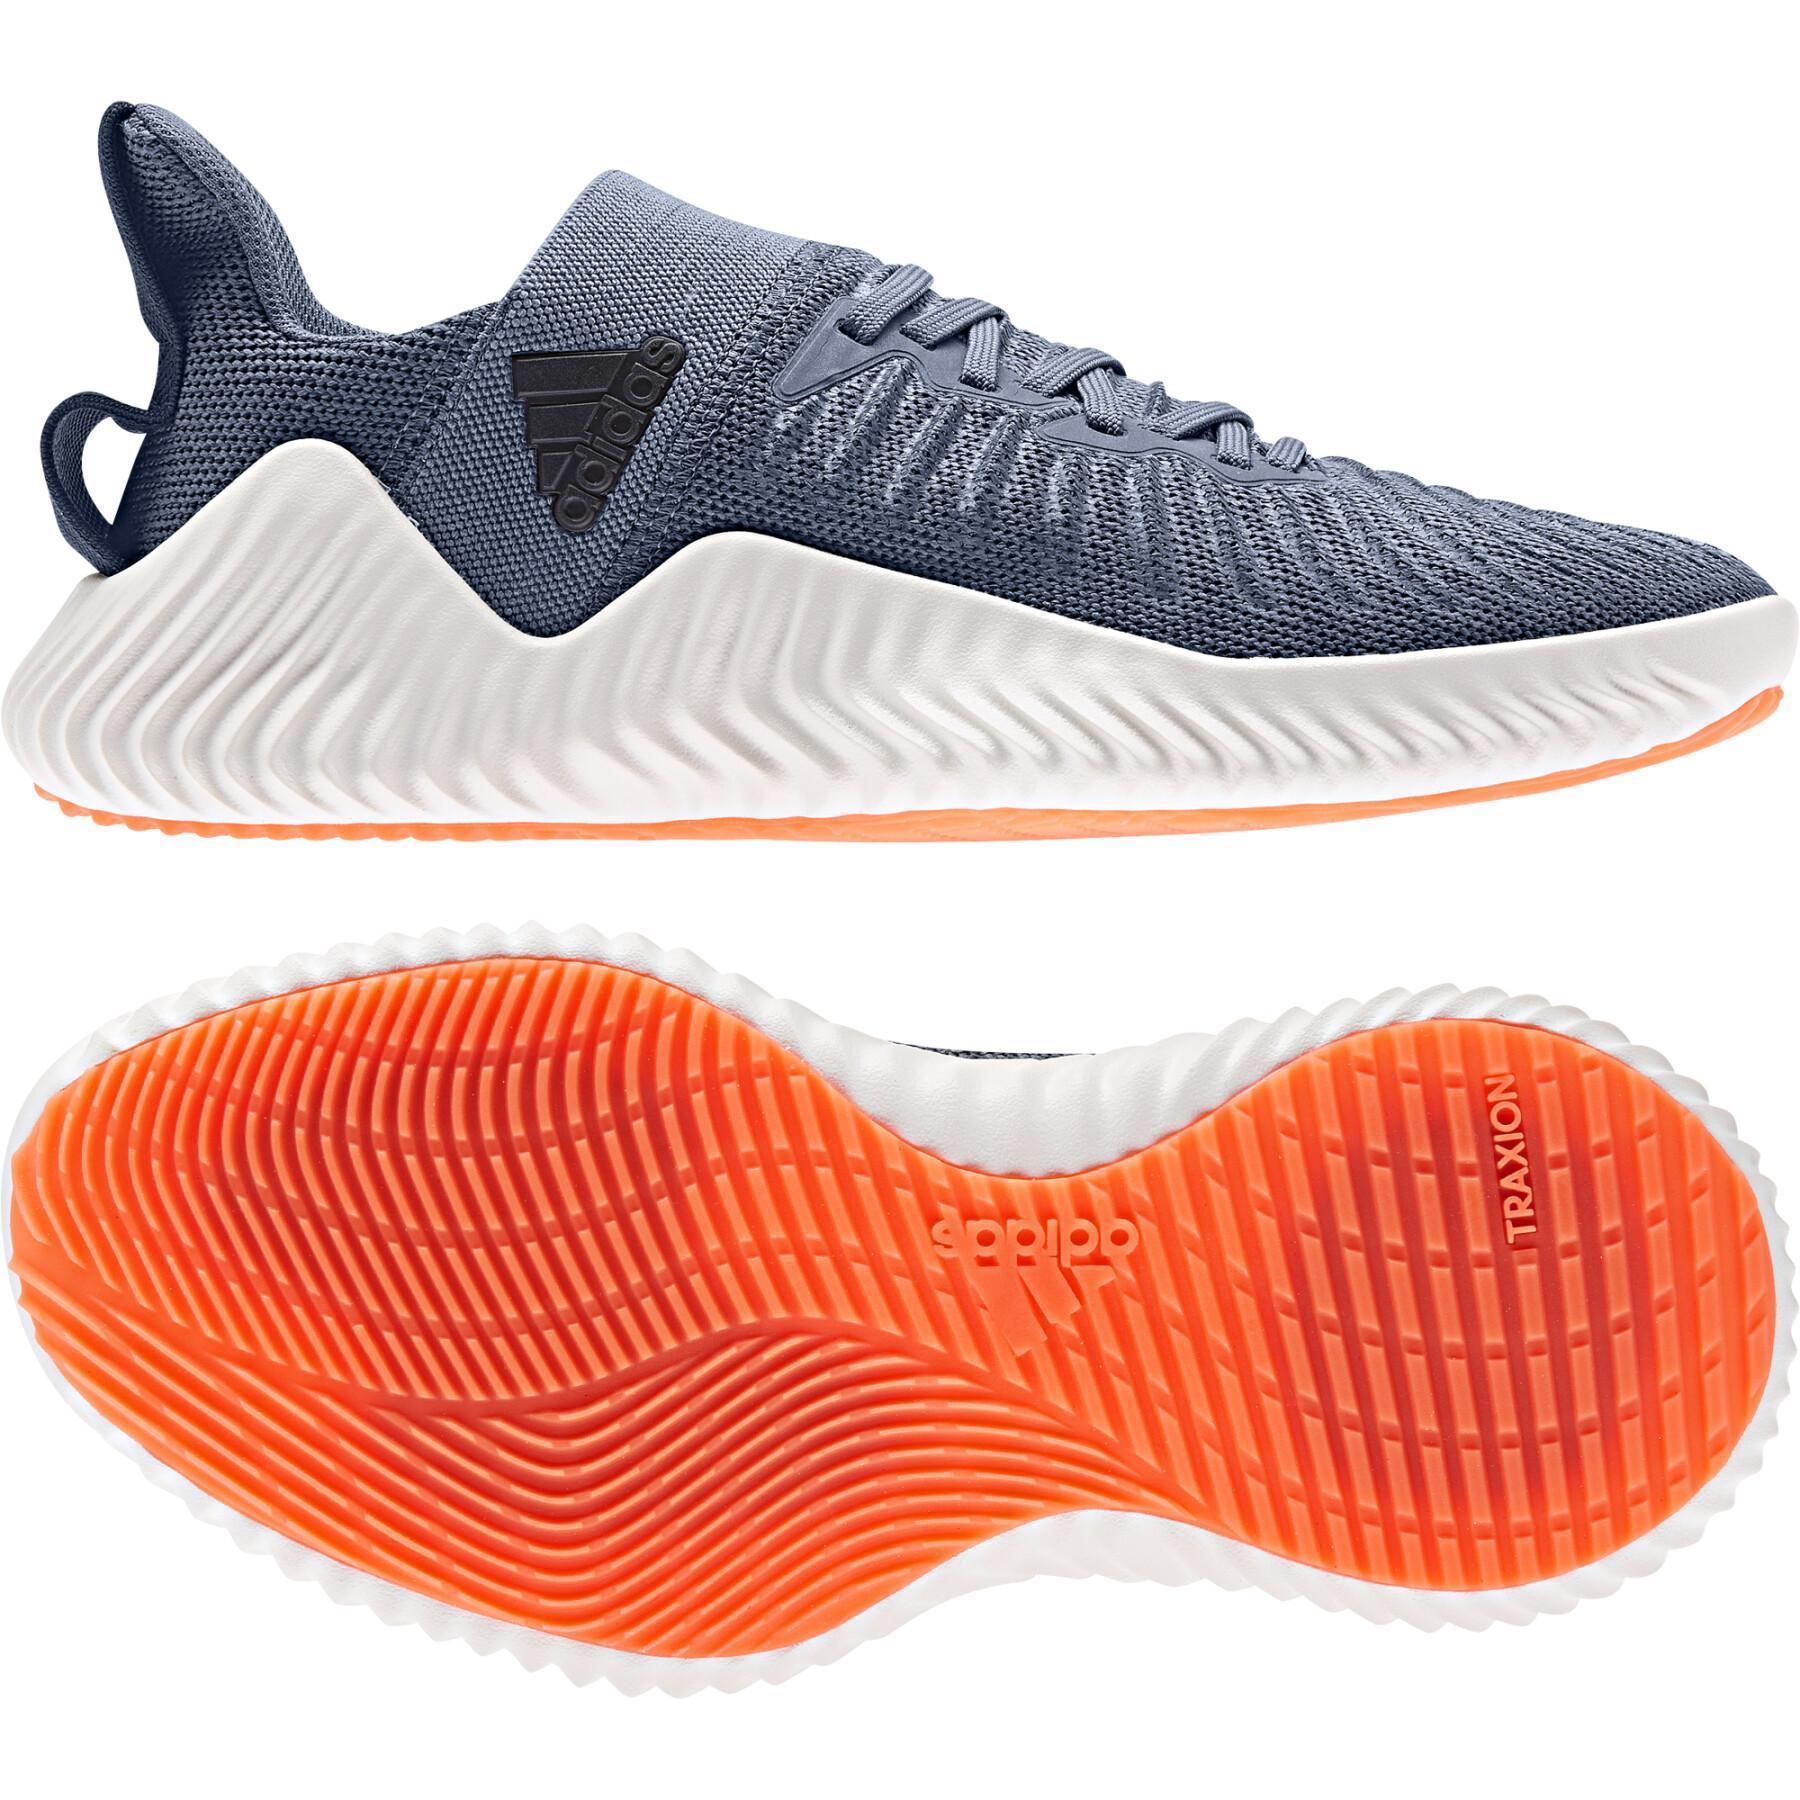 Chaussures adidas Alphabounce Trainer